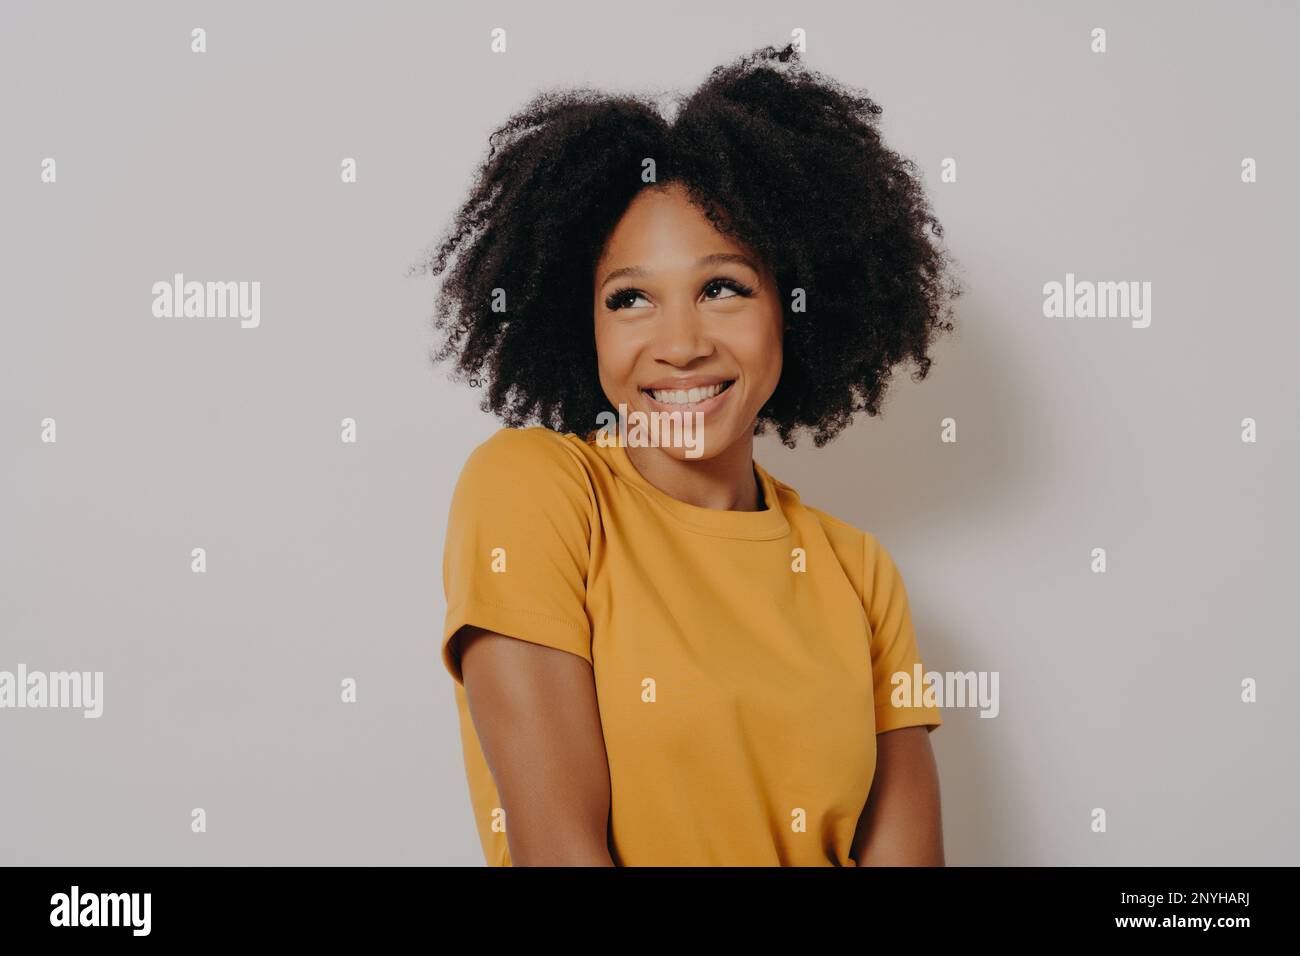 Studio shot close up portrait of casually dressed cute african american girl with funny astonished face expression. Emotional young mixed race woman w Stock Photo